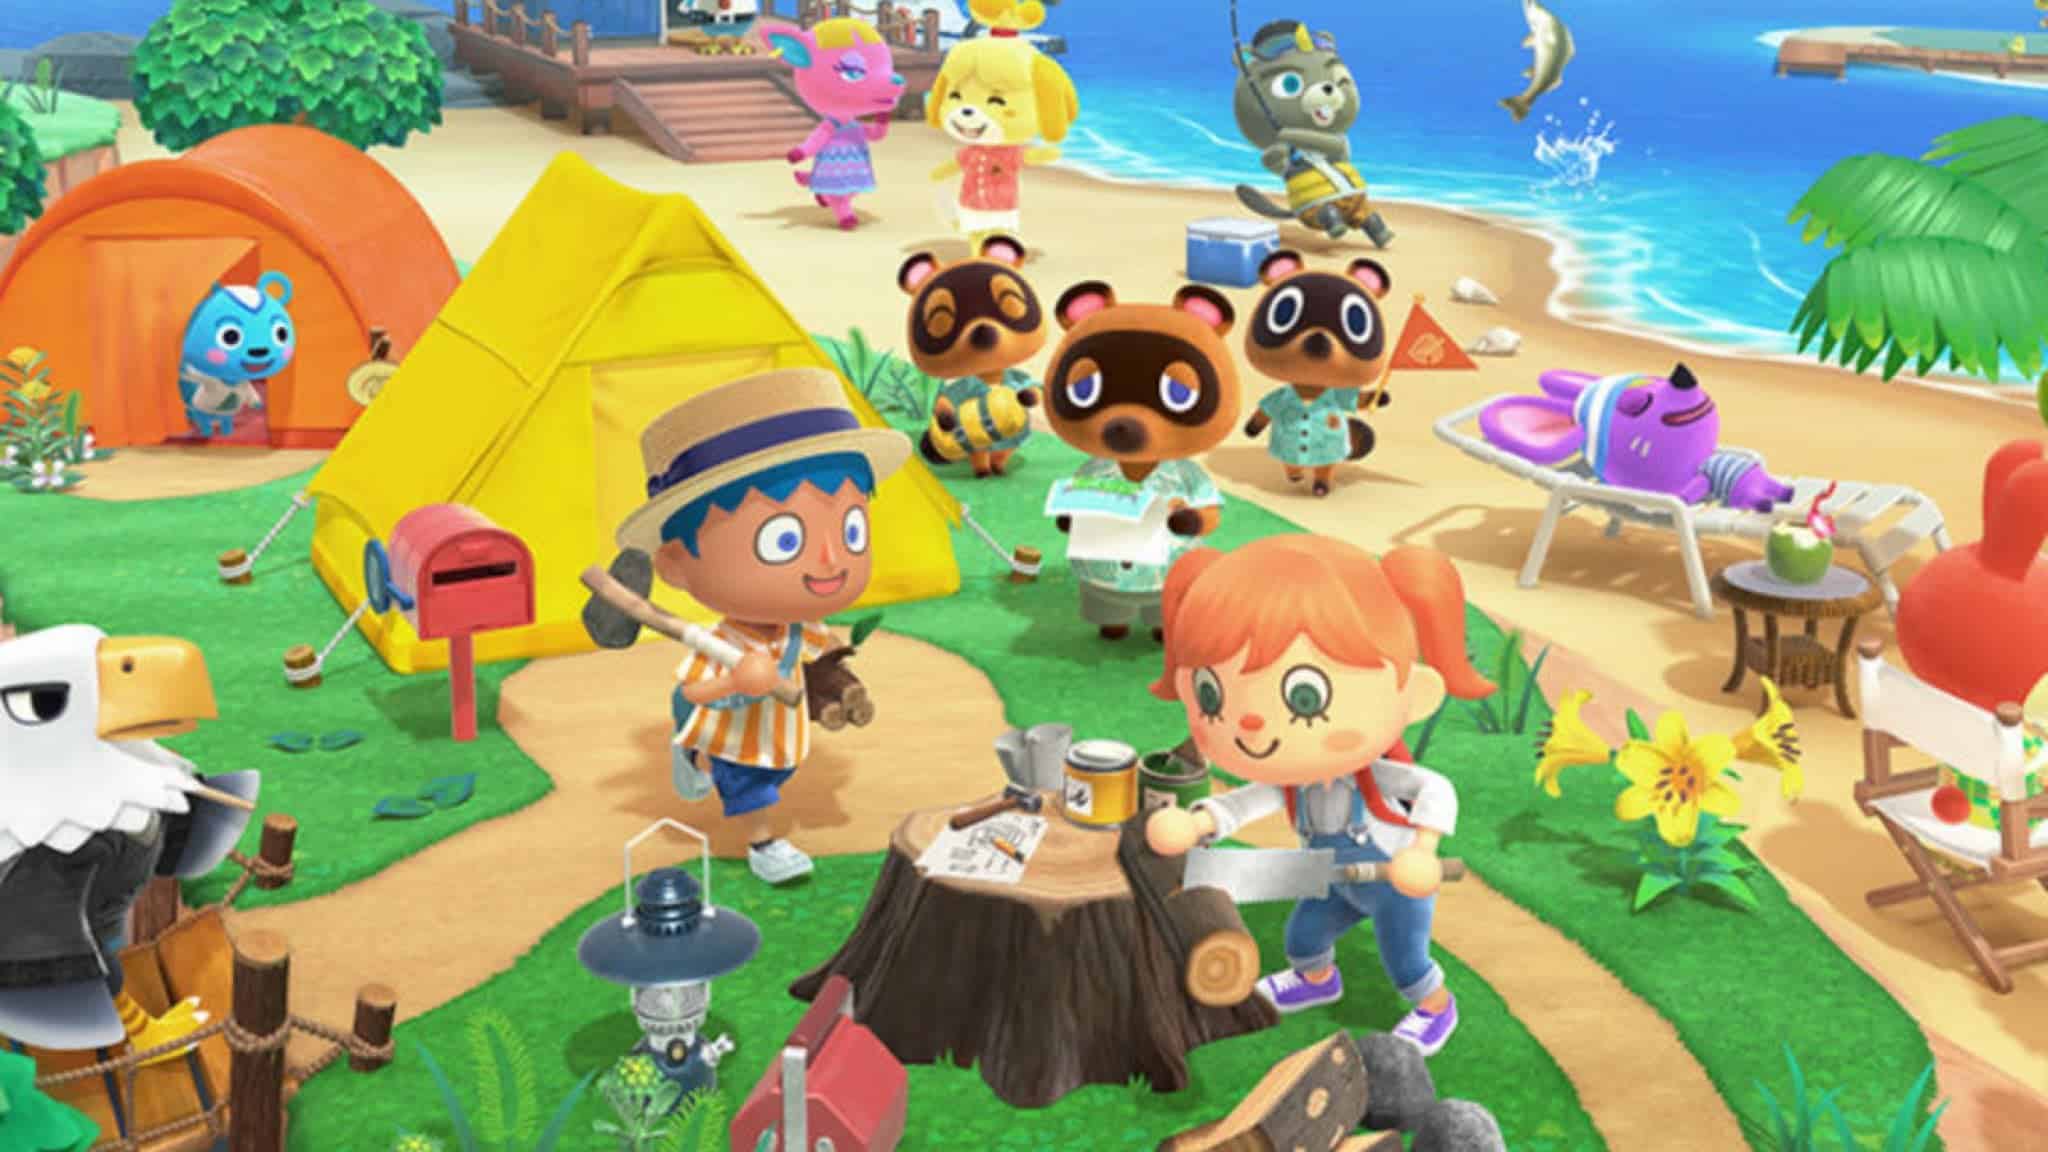 Review: Animal Crossing New Horizons